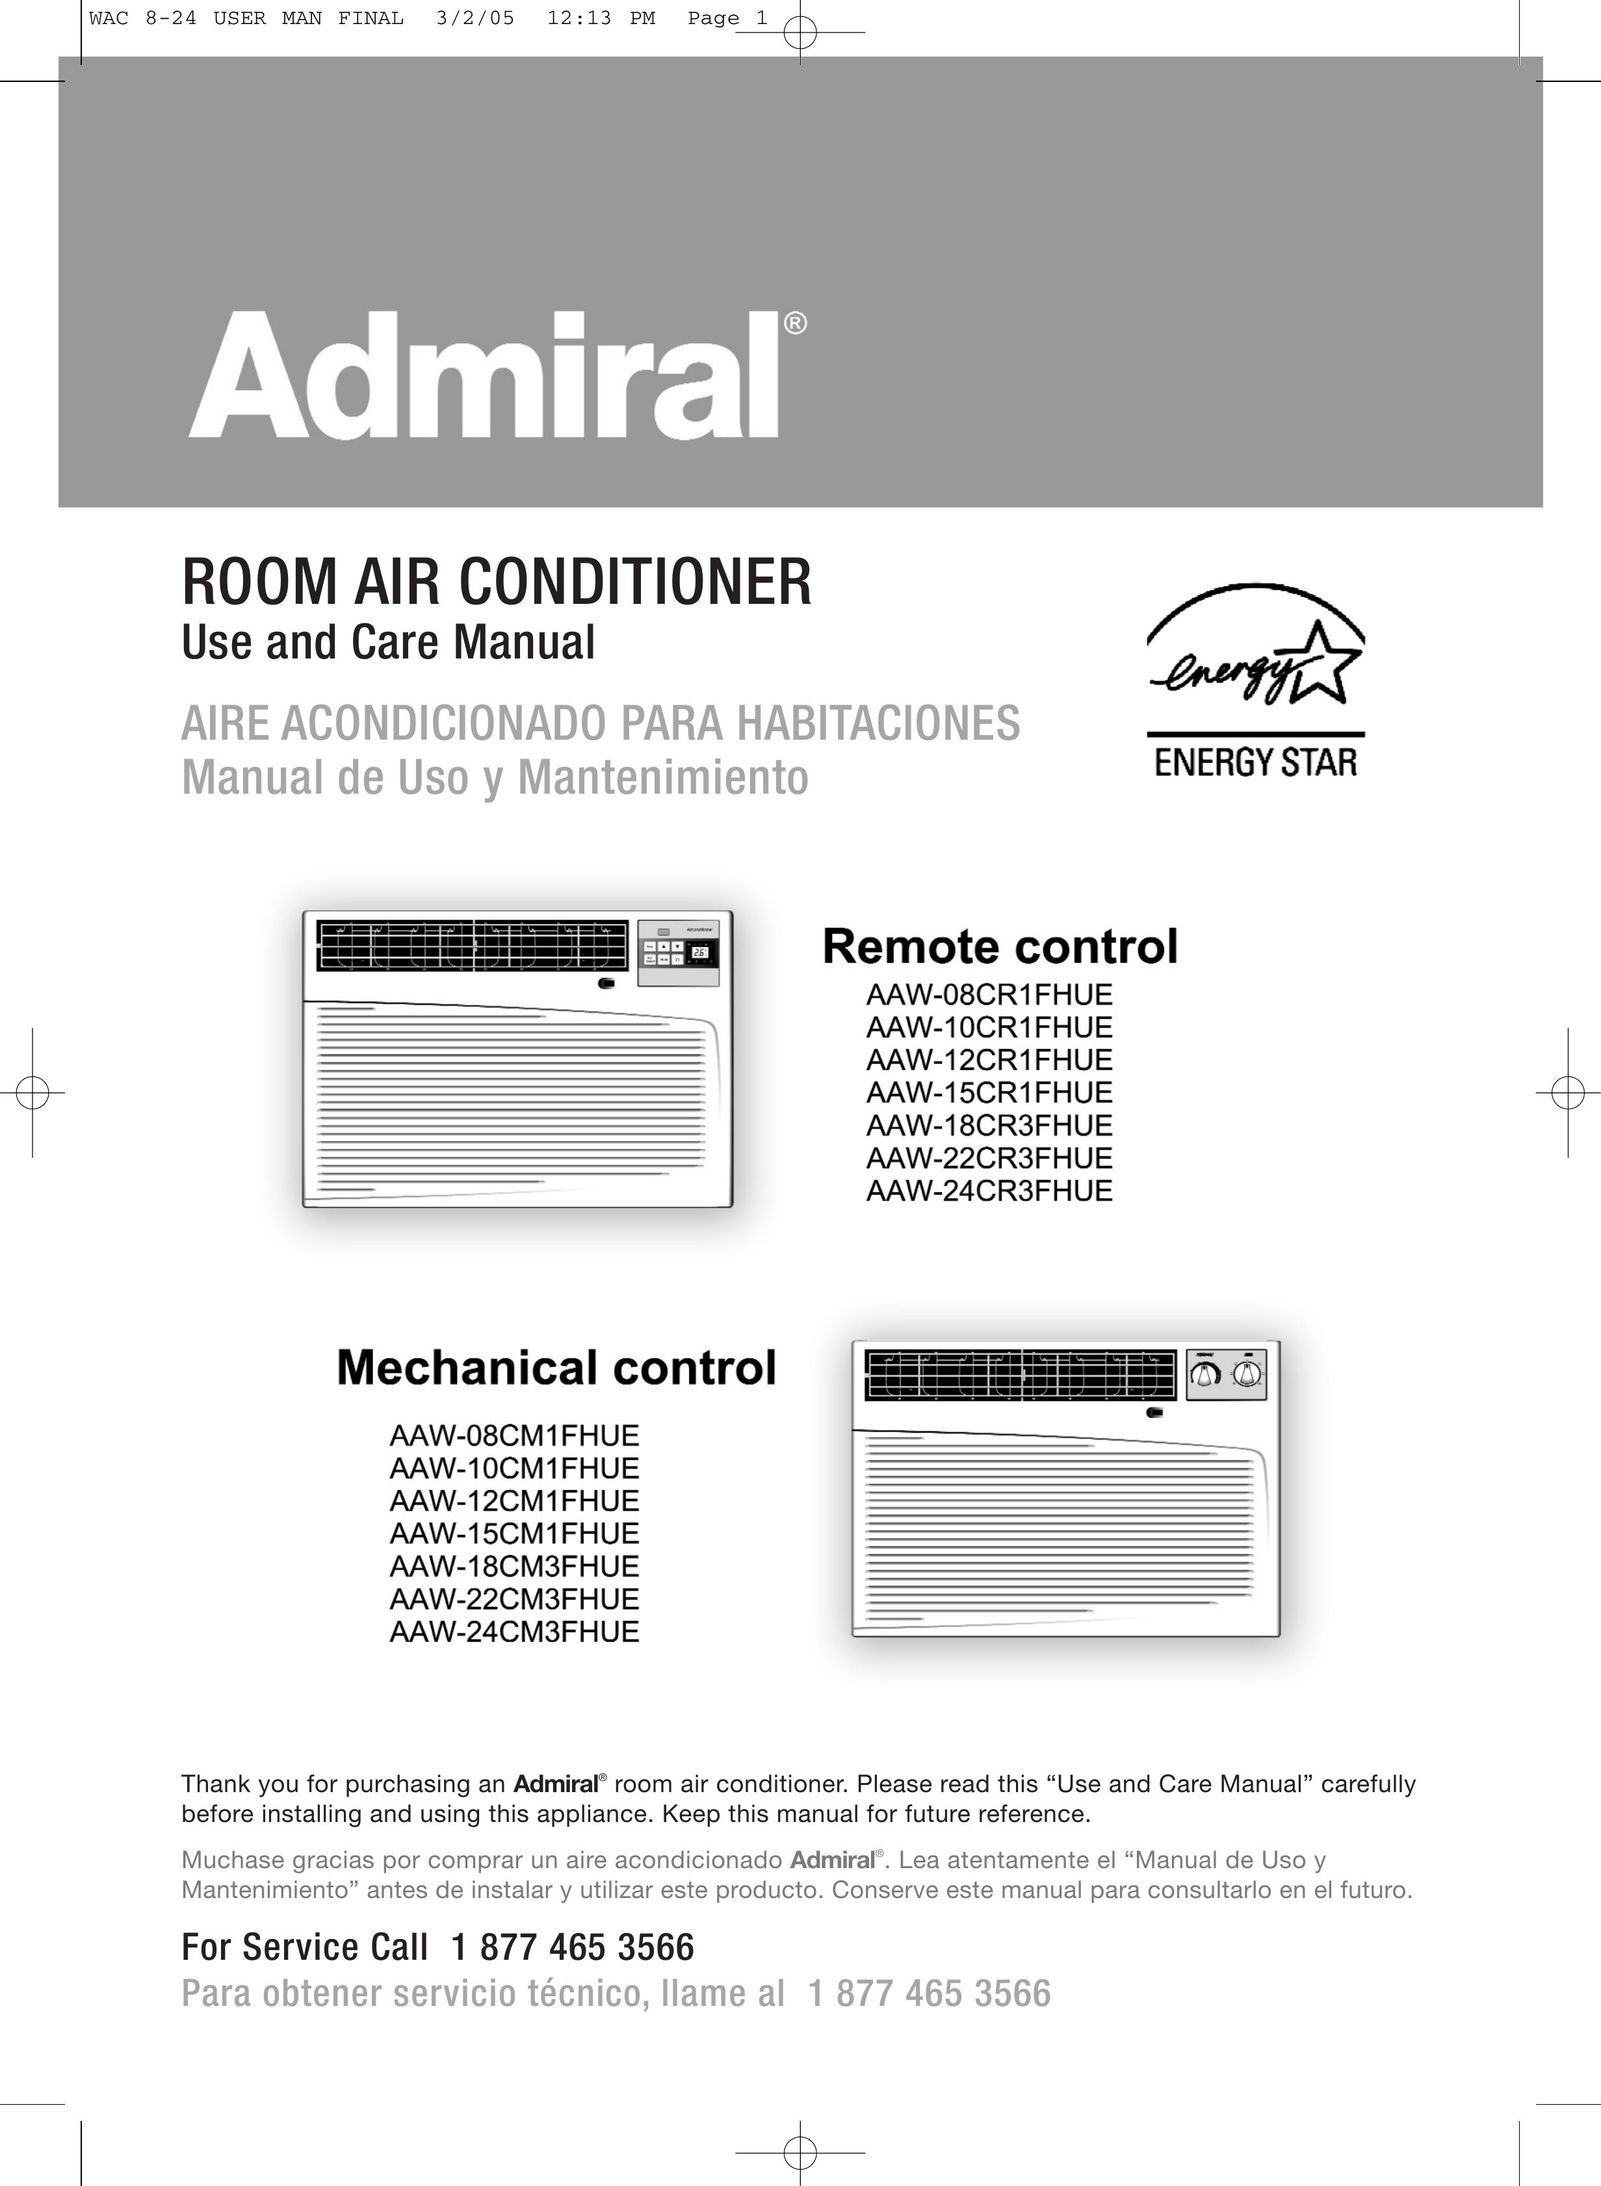 Admiral AAW-22CR1FHUE Air Conditioner User Manual